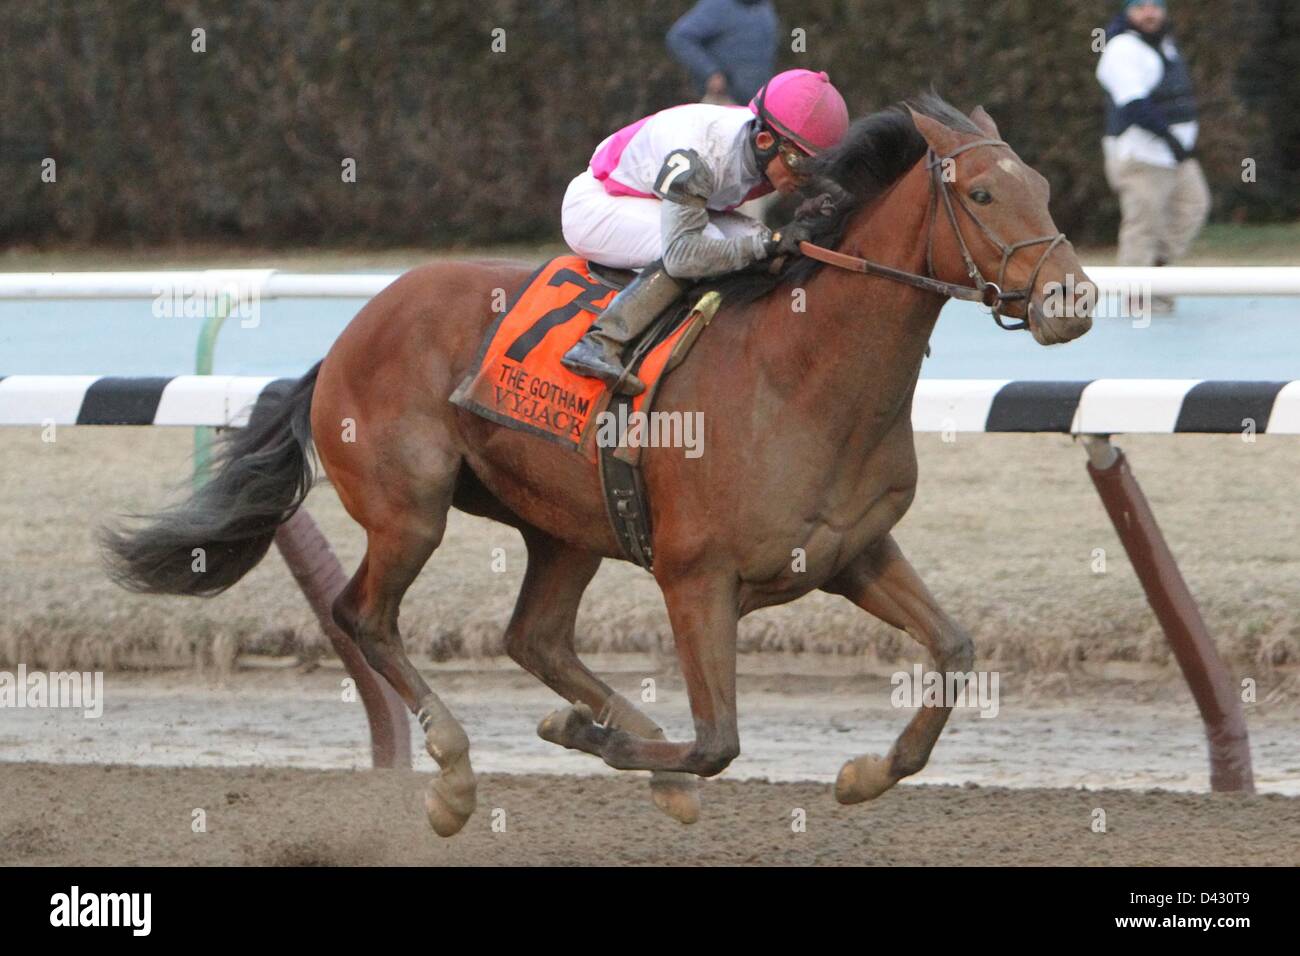 March 2, 2013 - Jamaica, New York, U.S. - Vyjack with Joel Rosaria win the Grade III Gotham for 3-year olds, going 1 1/16 mile, on the inner dirt at Aqueduct.  Trainer Rudy Rodriguez.  Owner Pix Six Racing (Credit Image: © Sue Kawczynski/Eclipse/ZUMAPRESS.com) Stock Photo